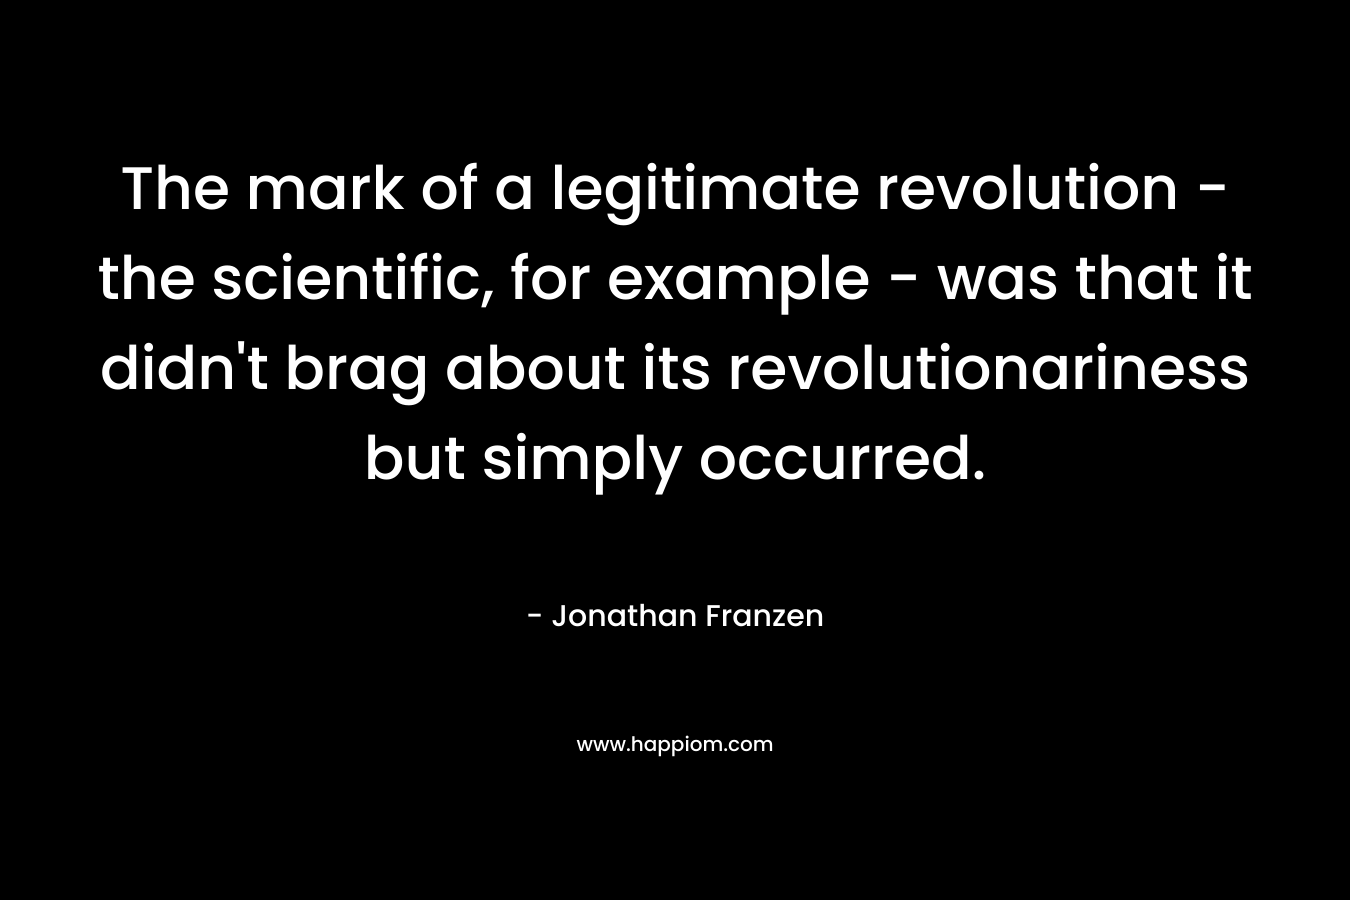 The mark of a legitimate revolution – the scientific, for example – was that it didn’t brag about its revolutionariness but simply occurred. – Jonathan Franzen